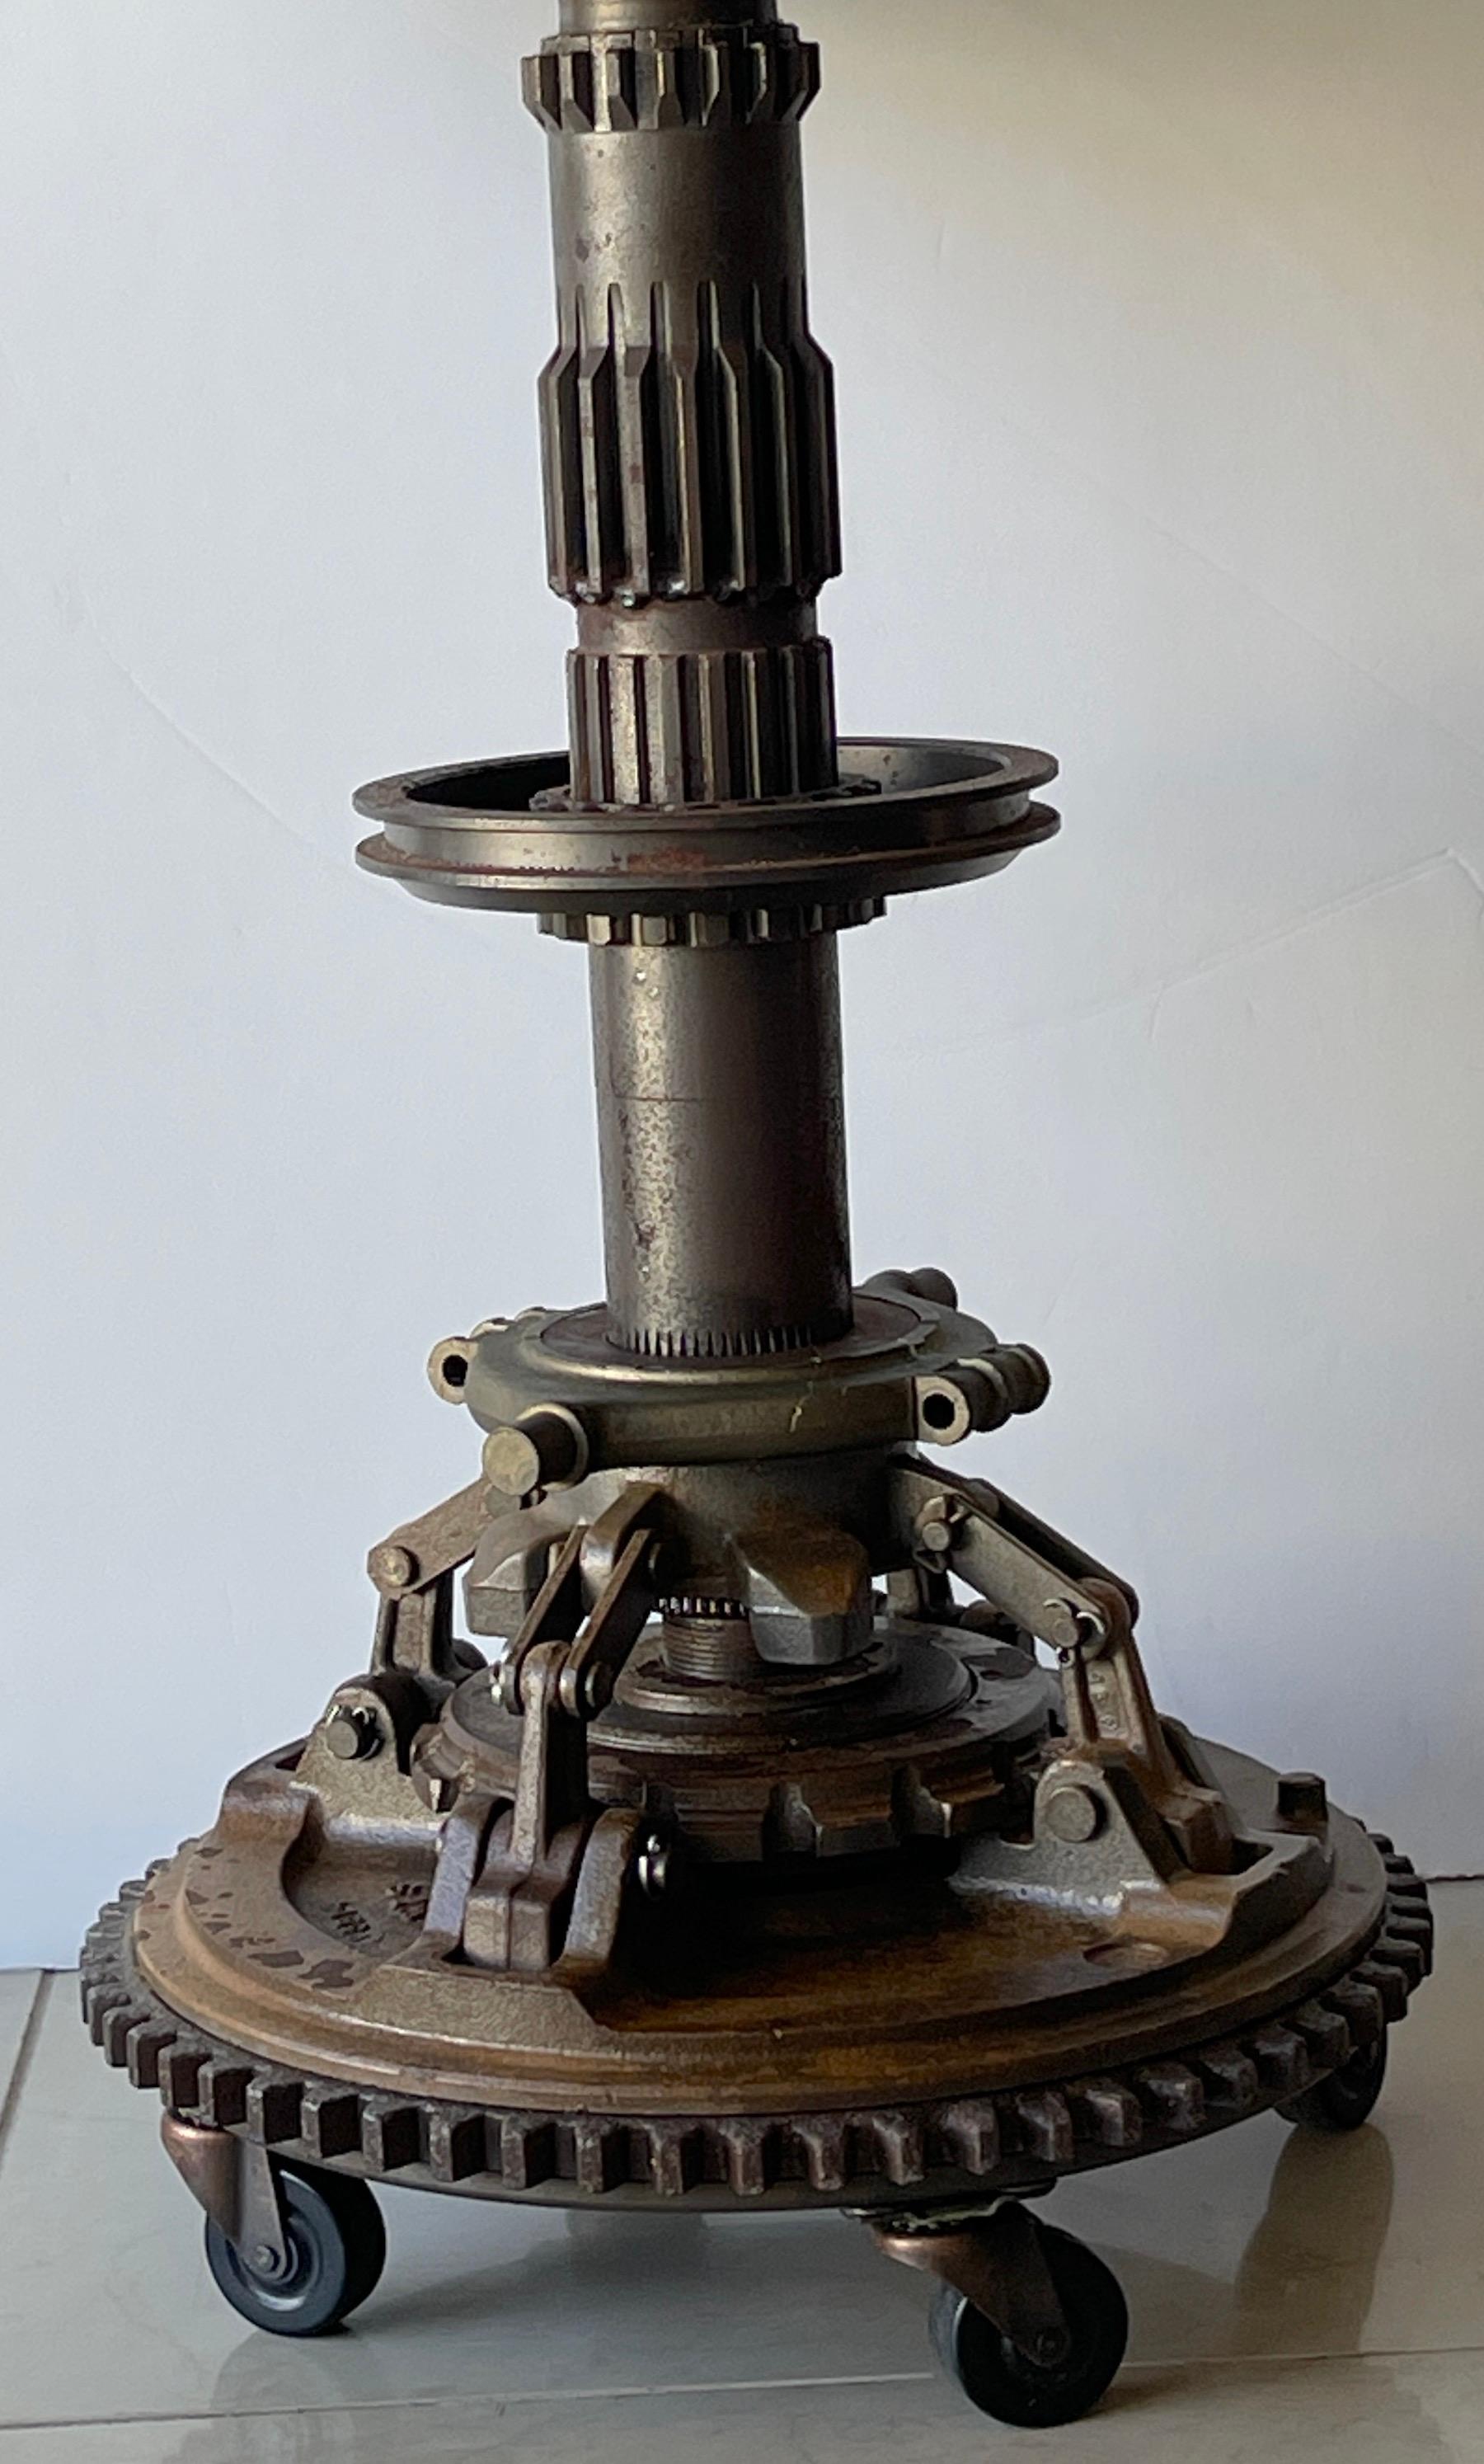 Aeronautical Camshaft Gueridon Gueridon, C. 1990s In Good Condition For Sale In West Palm Beach, FL